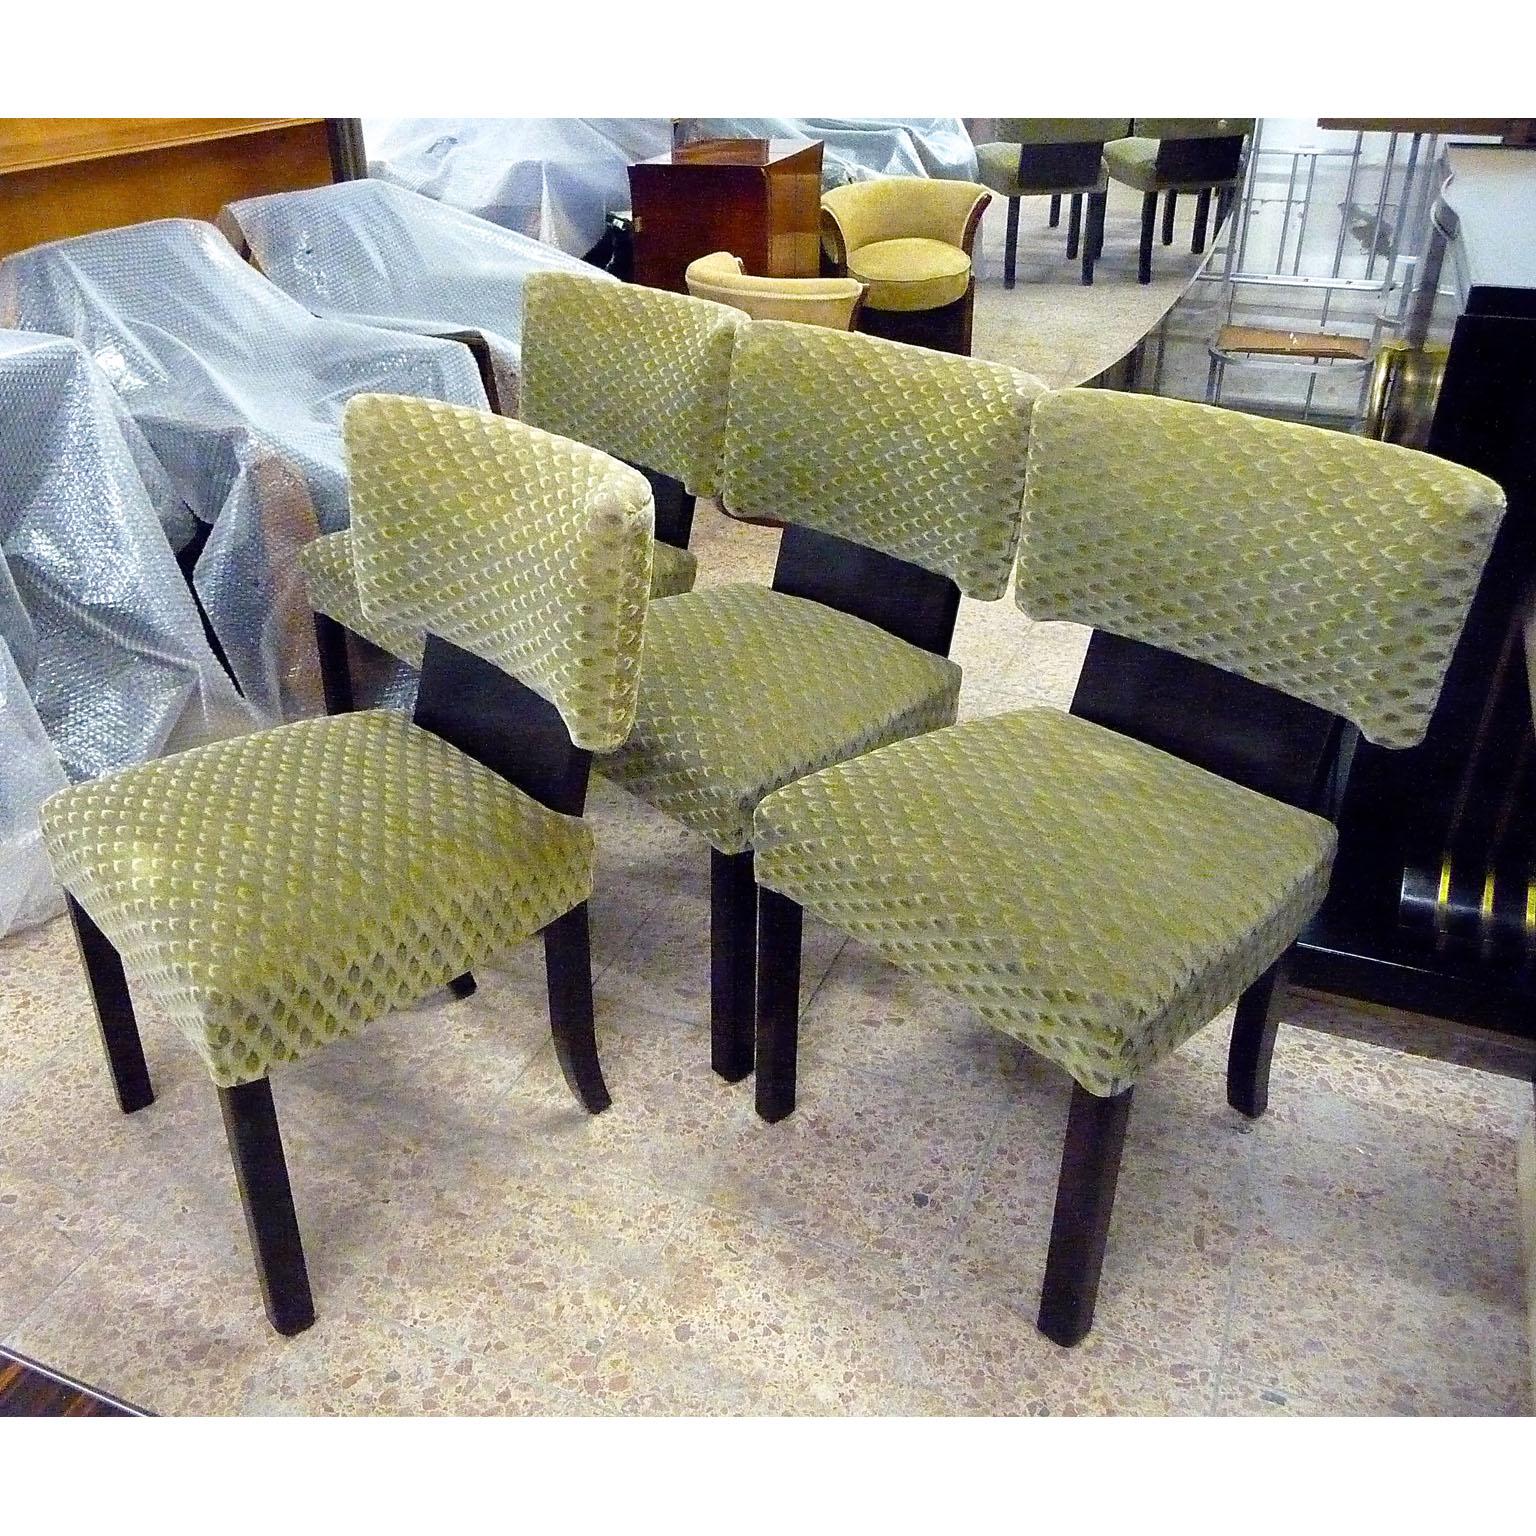 Mid-20th Century Art Deco Bauhaus Dining Chairs, Set of Four, Bruno Paul Design, Germany, 1930s